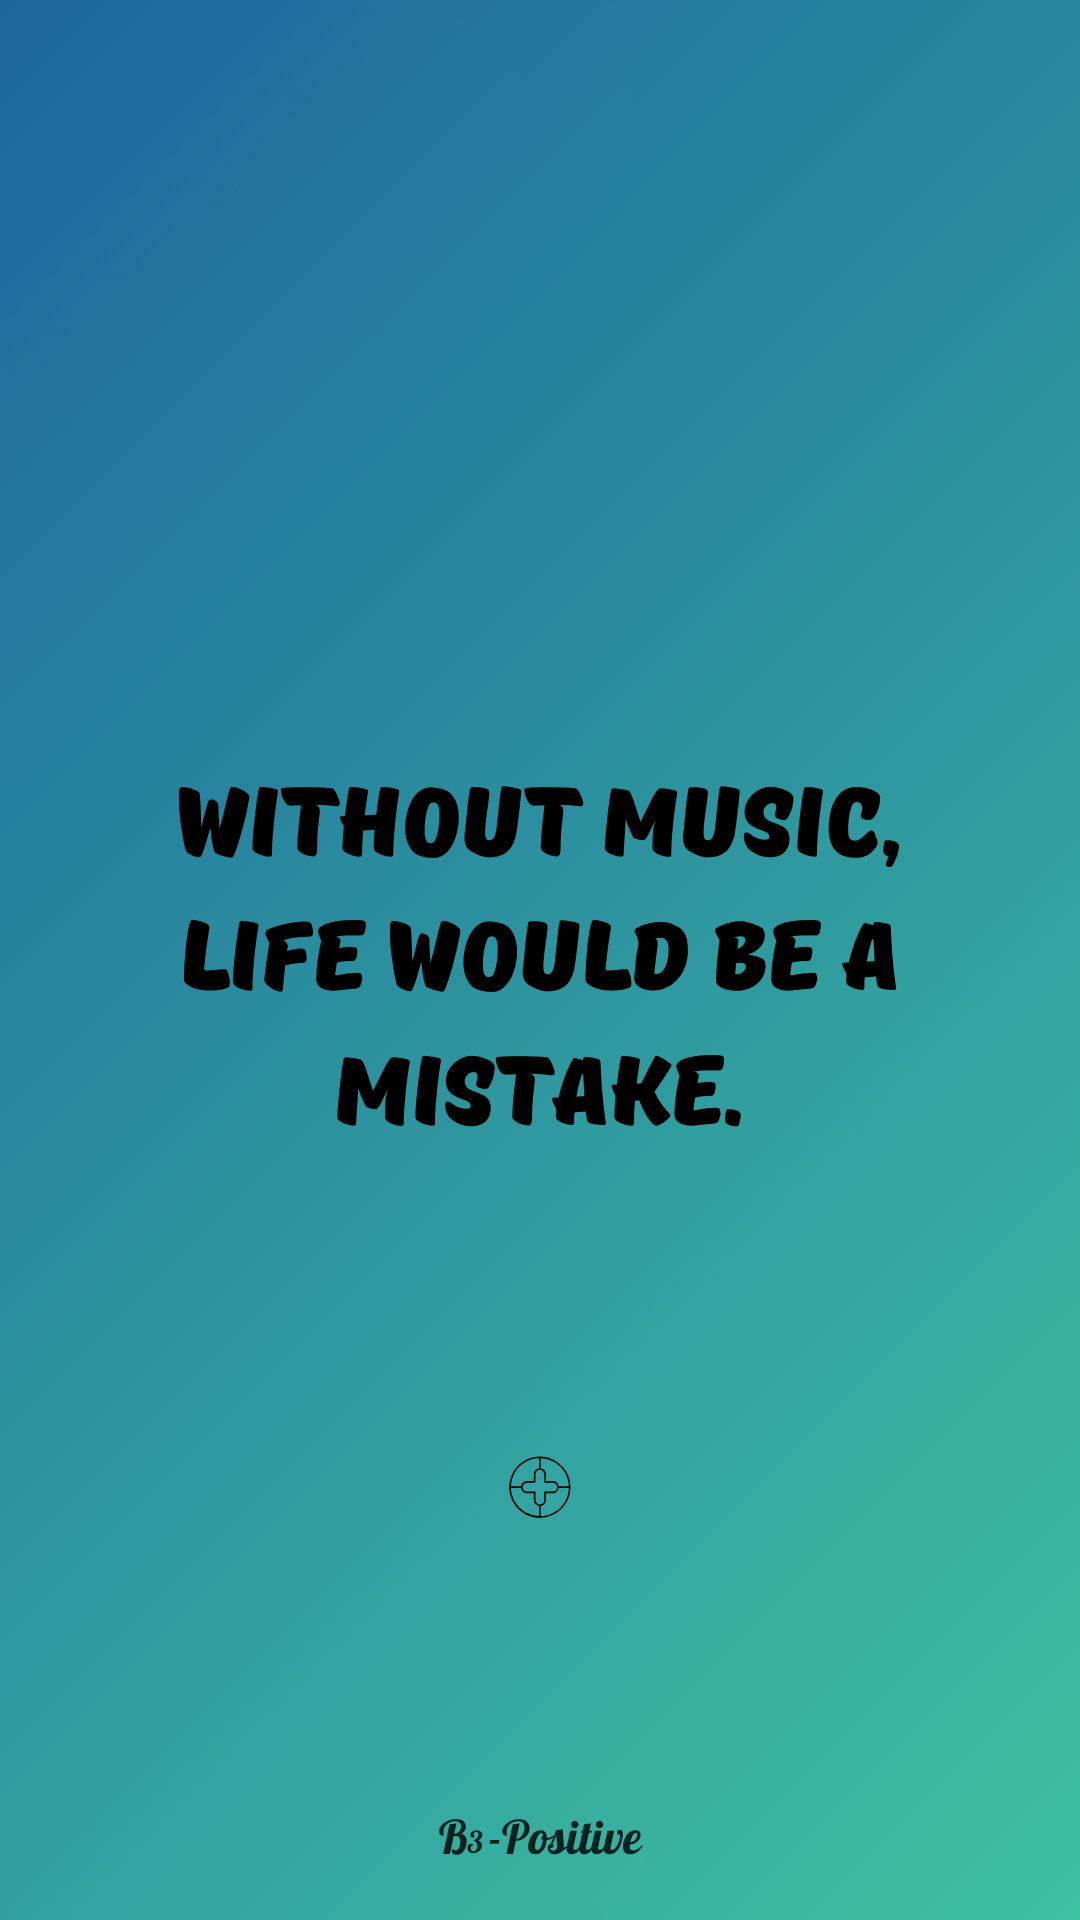 Music Quotes Wallpaper IPhone Android [FREE DOWNLOAD]